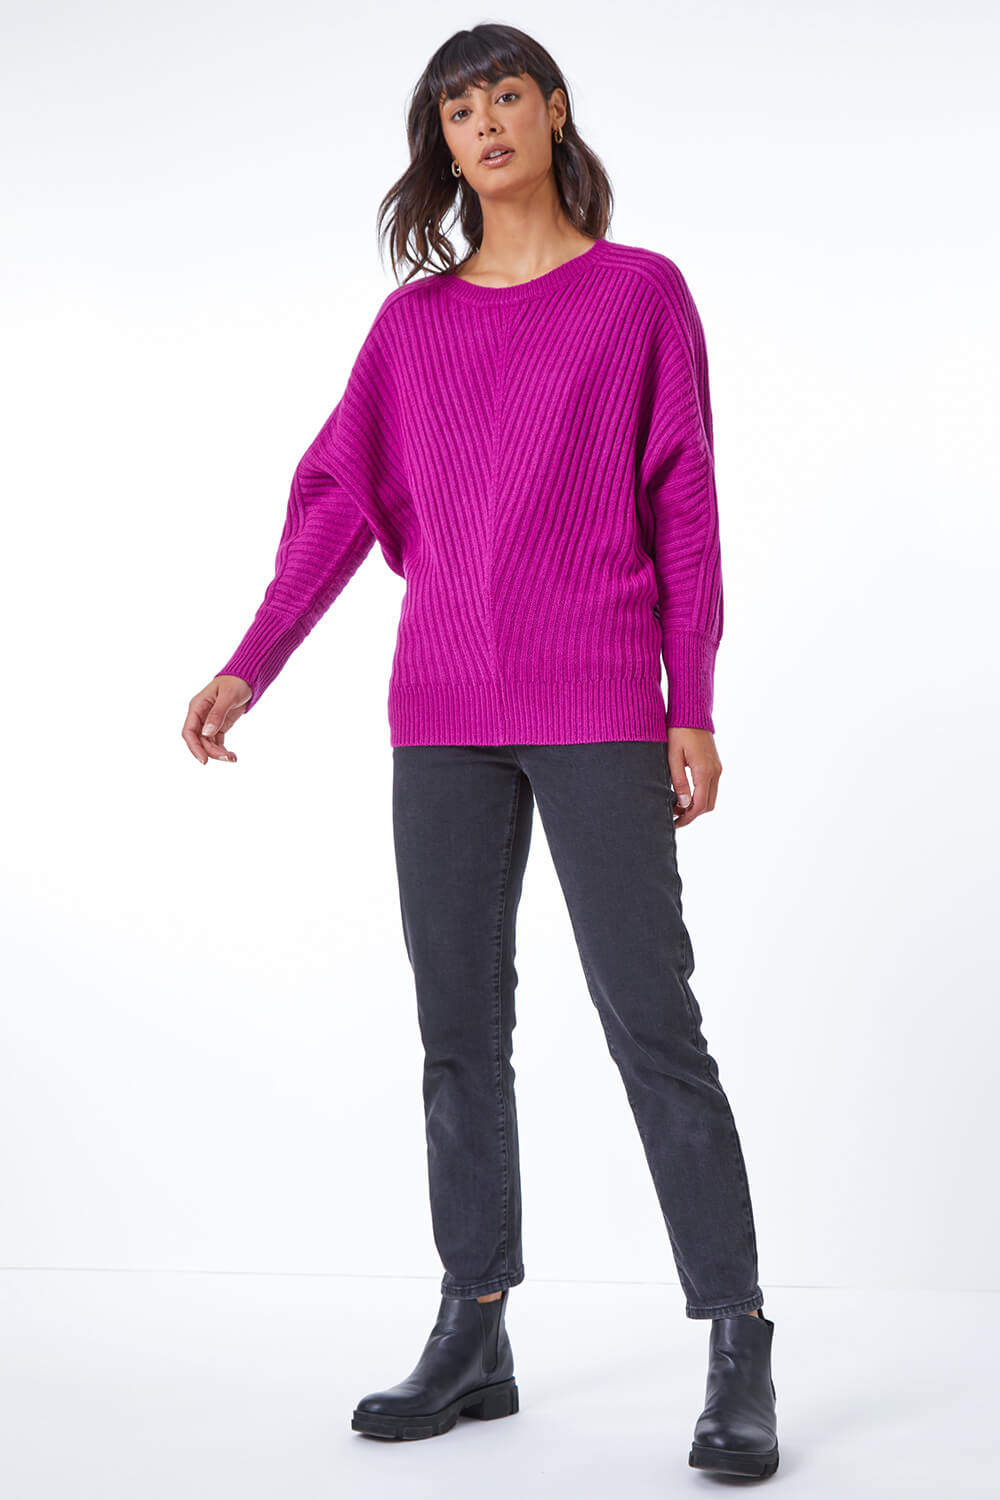 MAGENTA Ribbed Batwing Knitted Jumper , Image 2 of 5